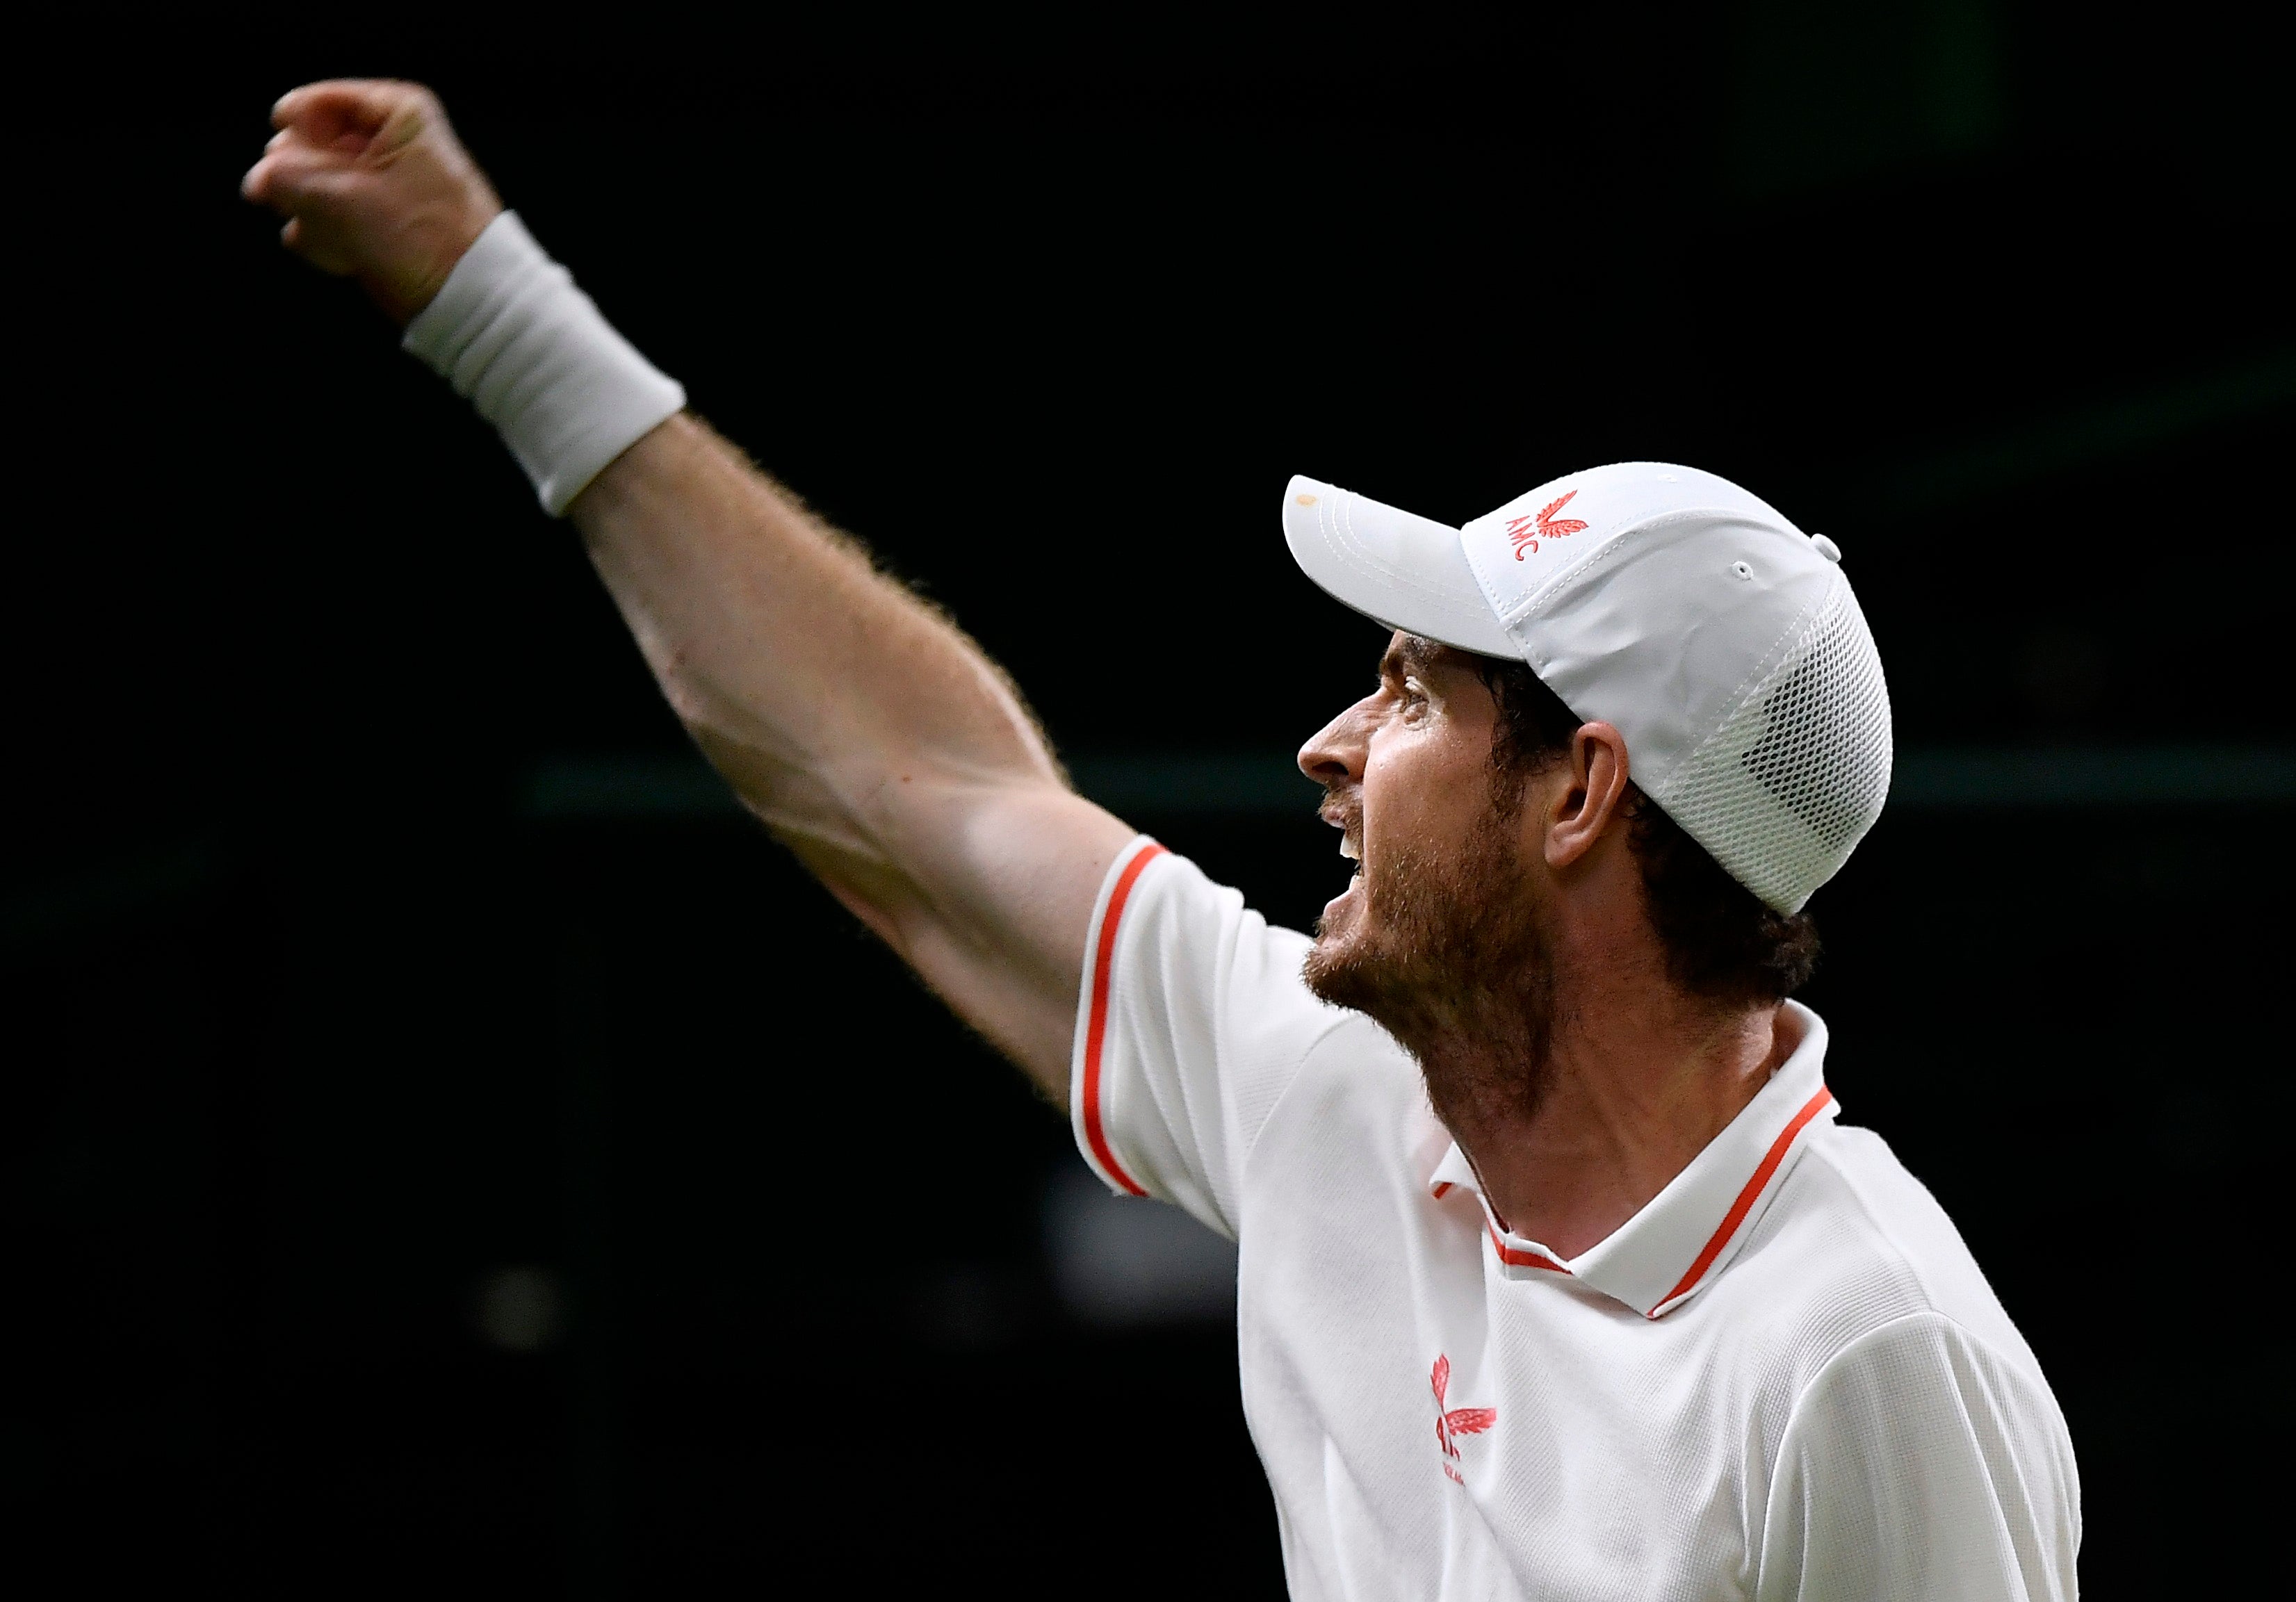 Andy Murray won a second-round game lasting nearly four hours